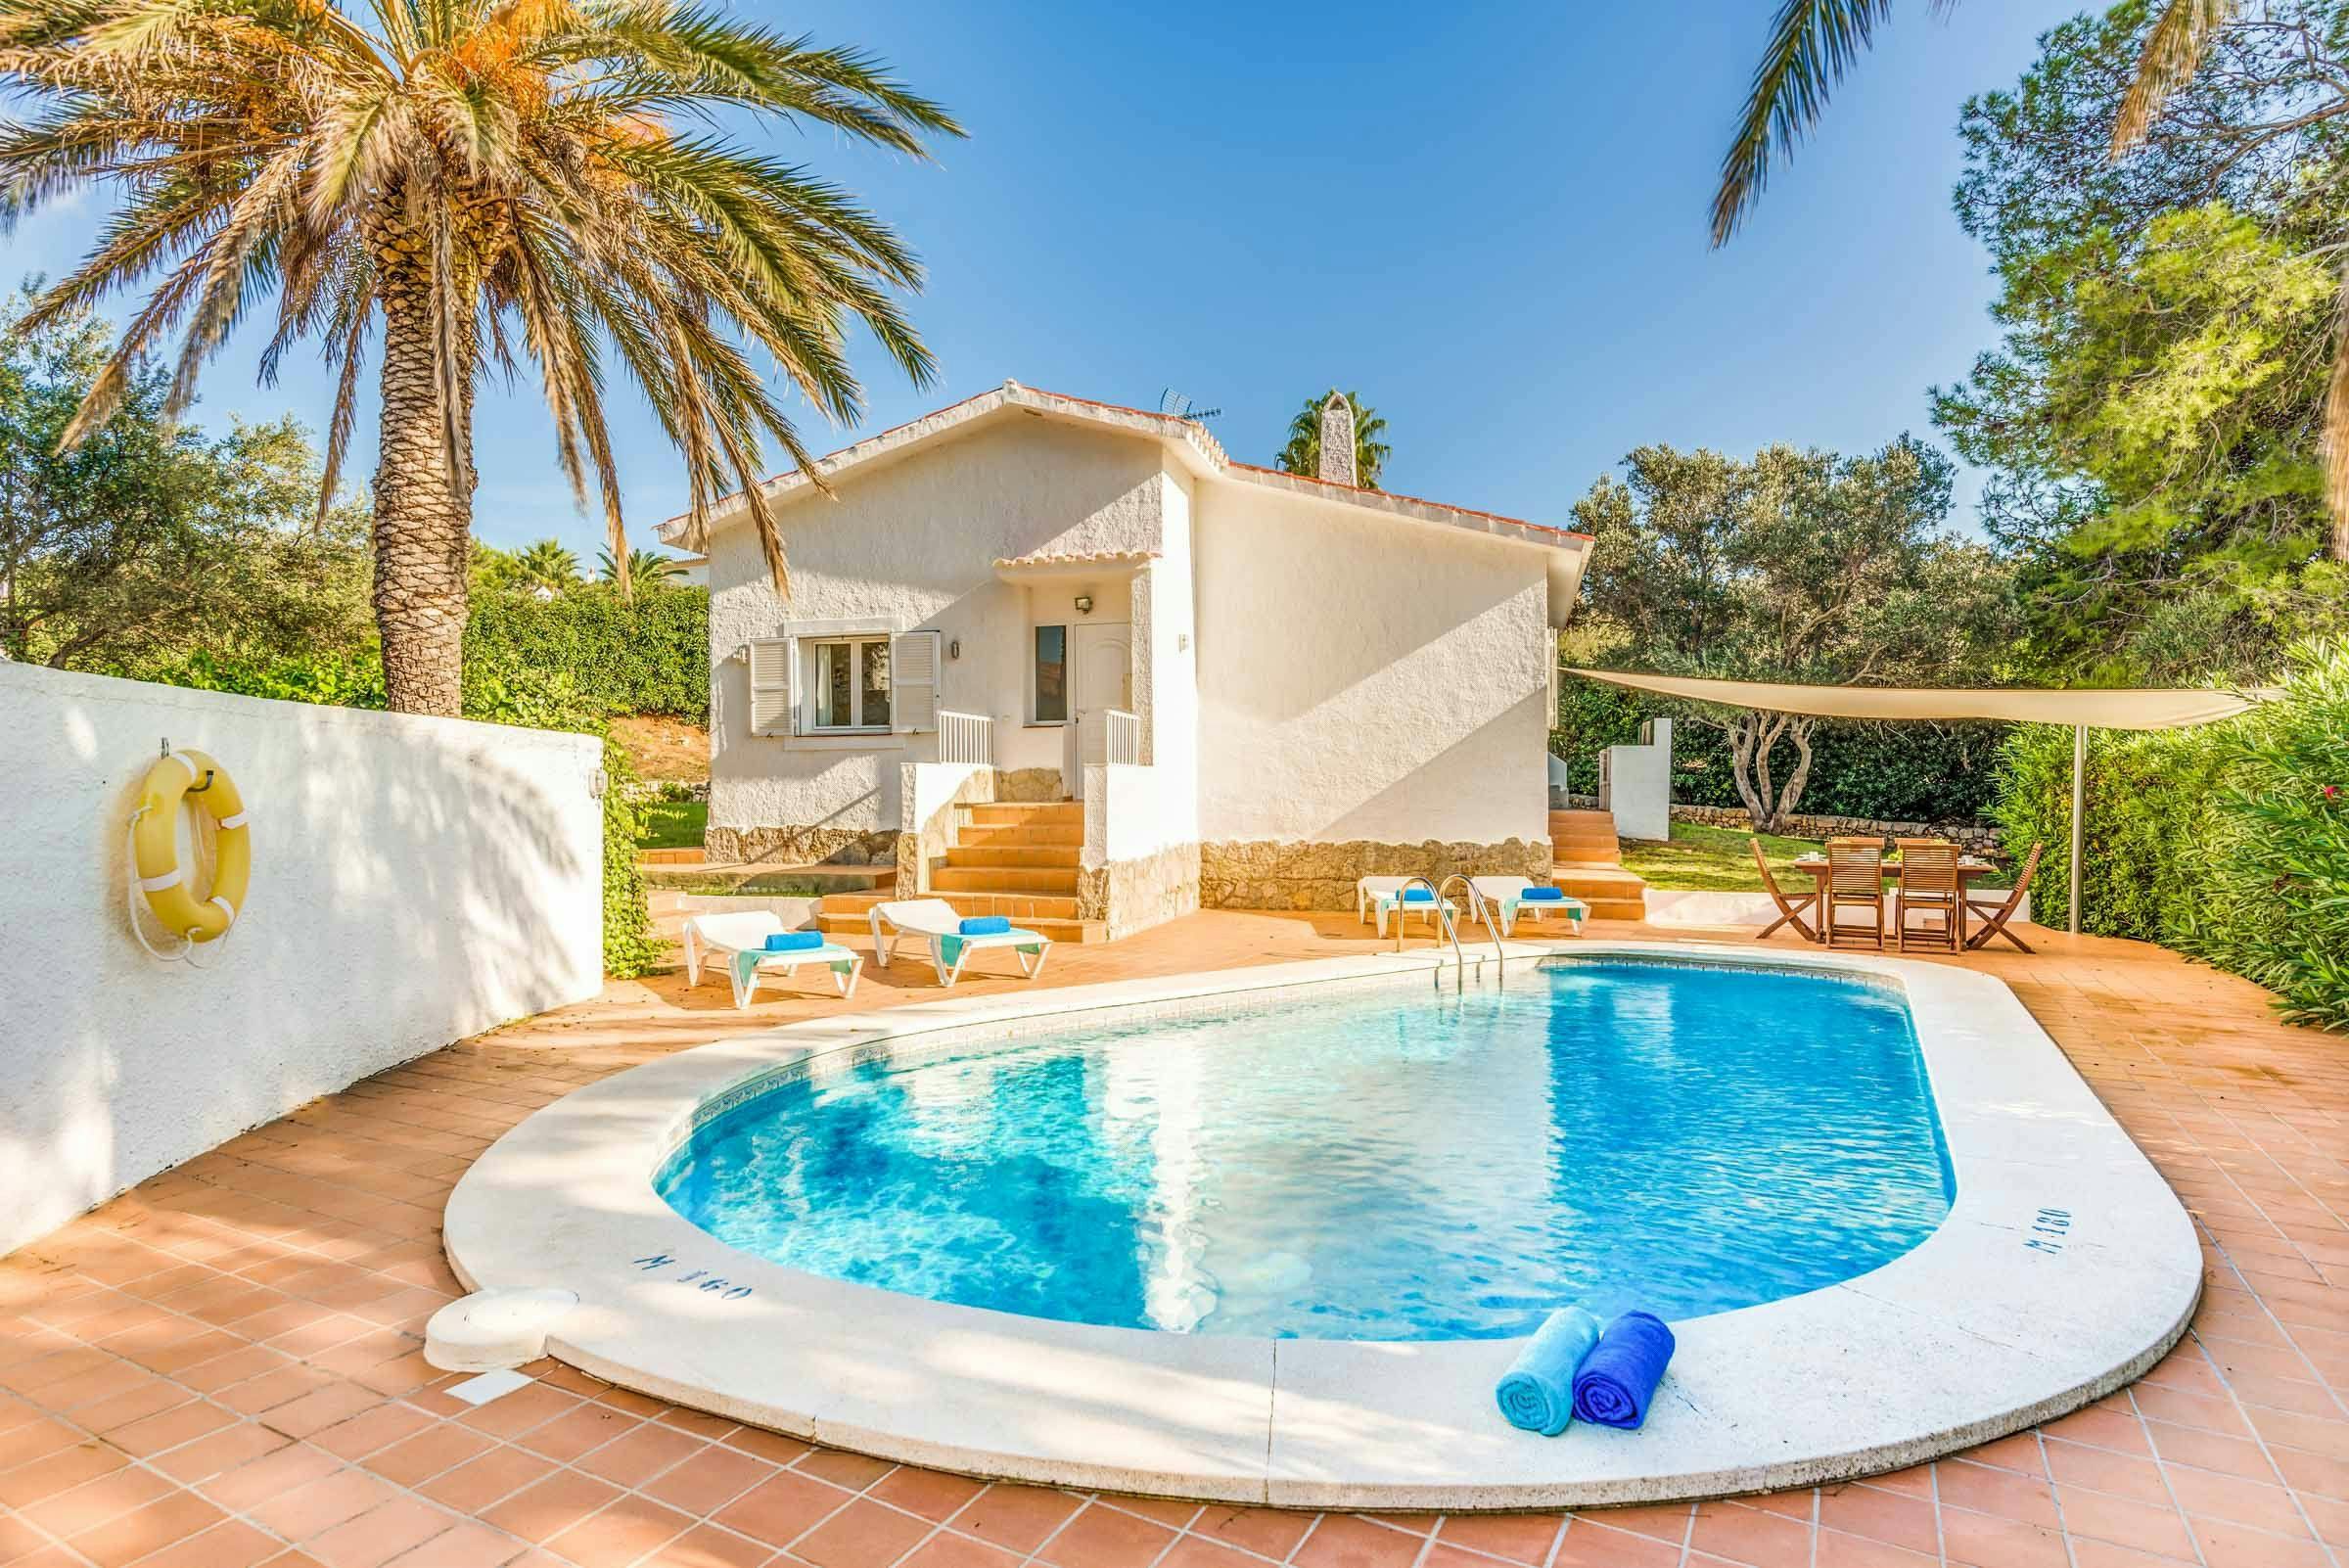 Villas in Menorca with a private pool - Villas Marismas Sombra small vacation home with private pool